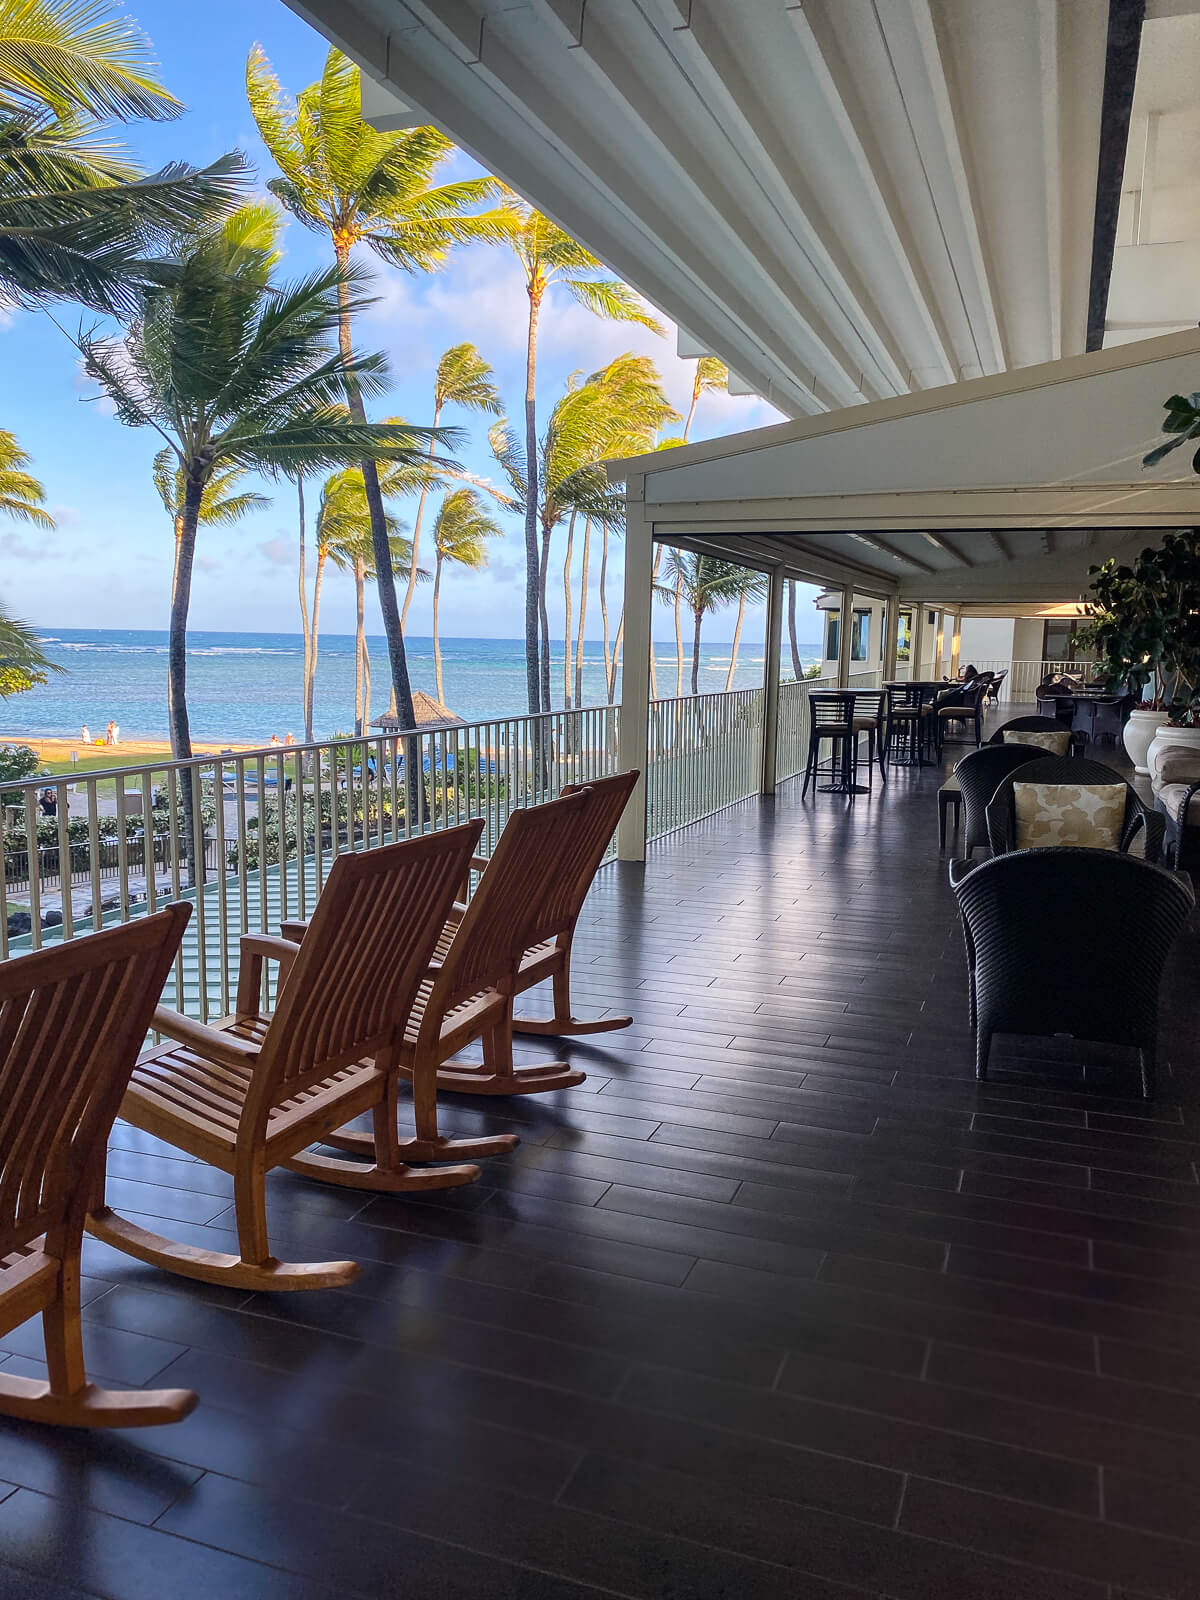 Wooden rocking chairs on the Veranda overlooking the ocean at the Kahala. 